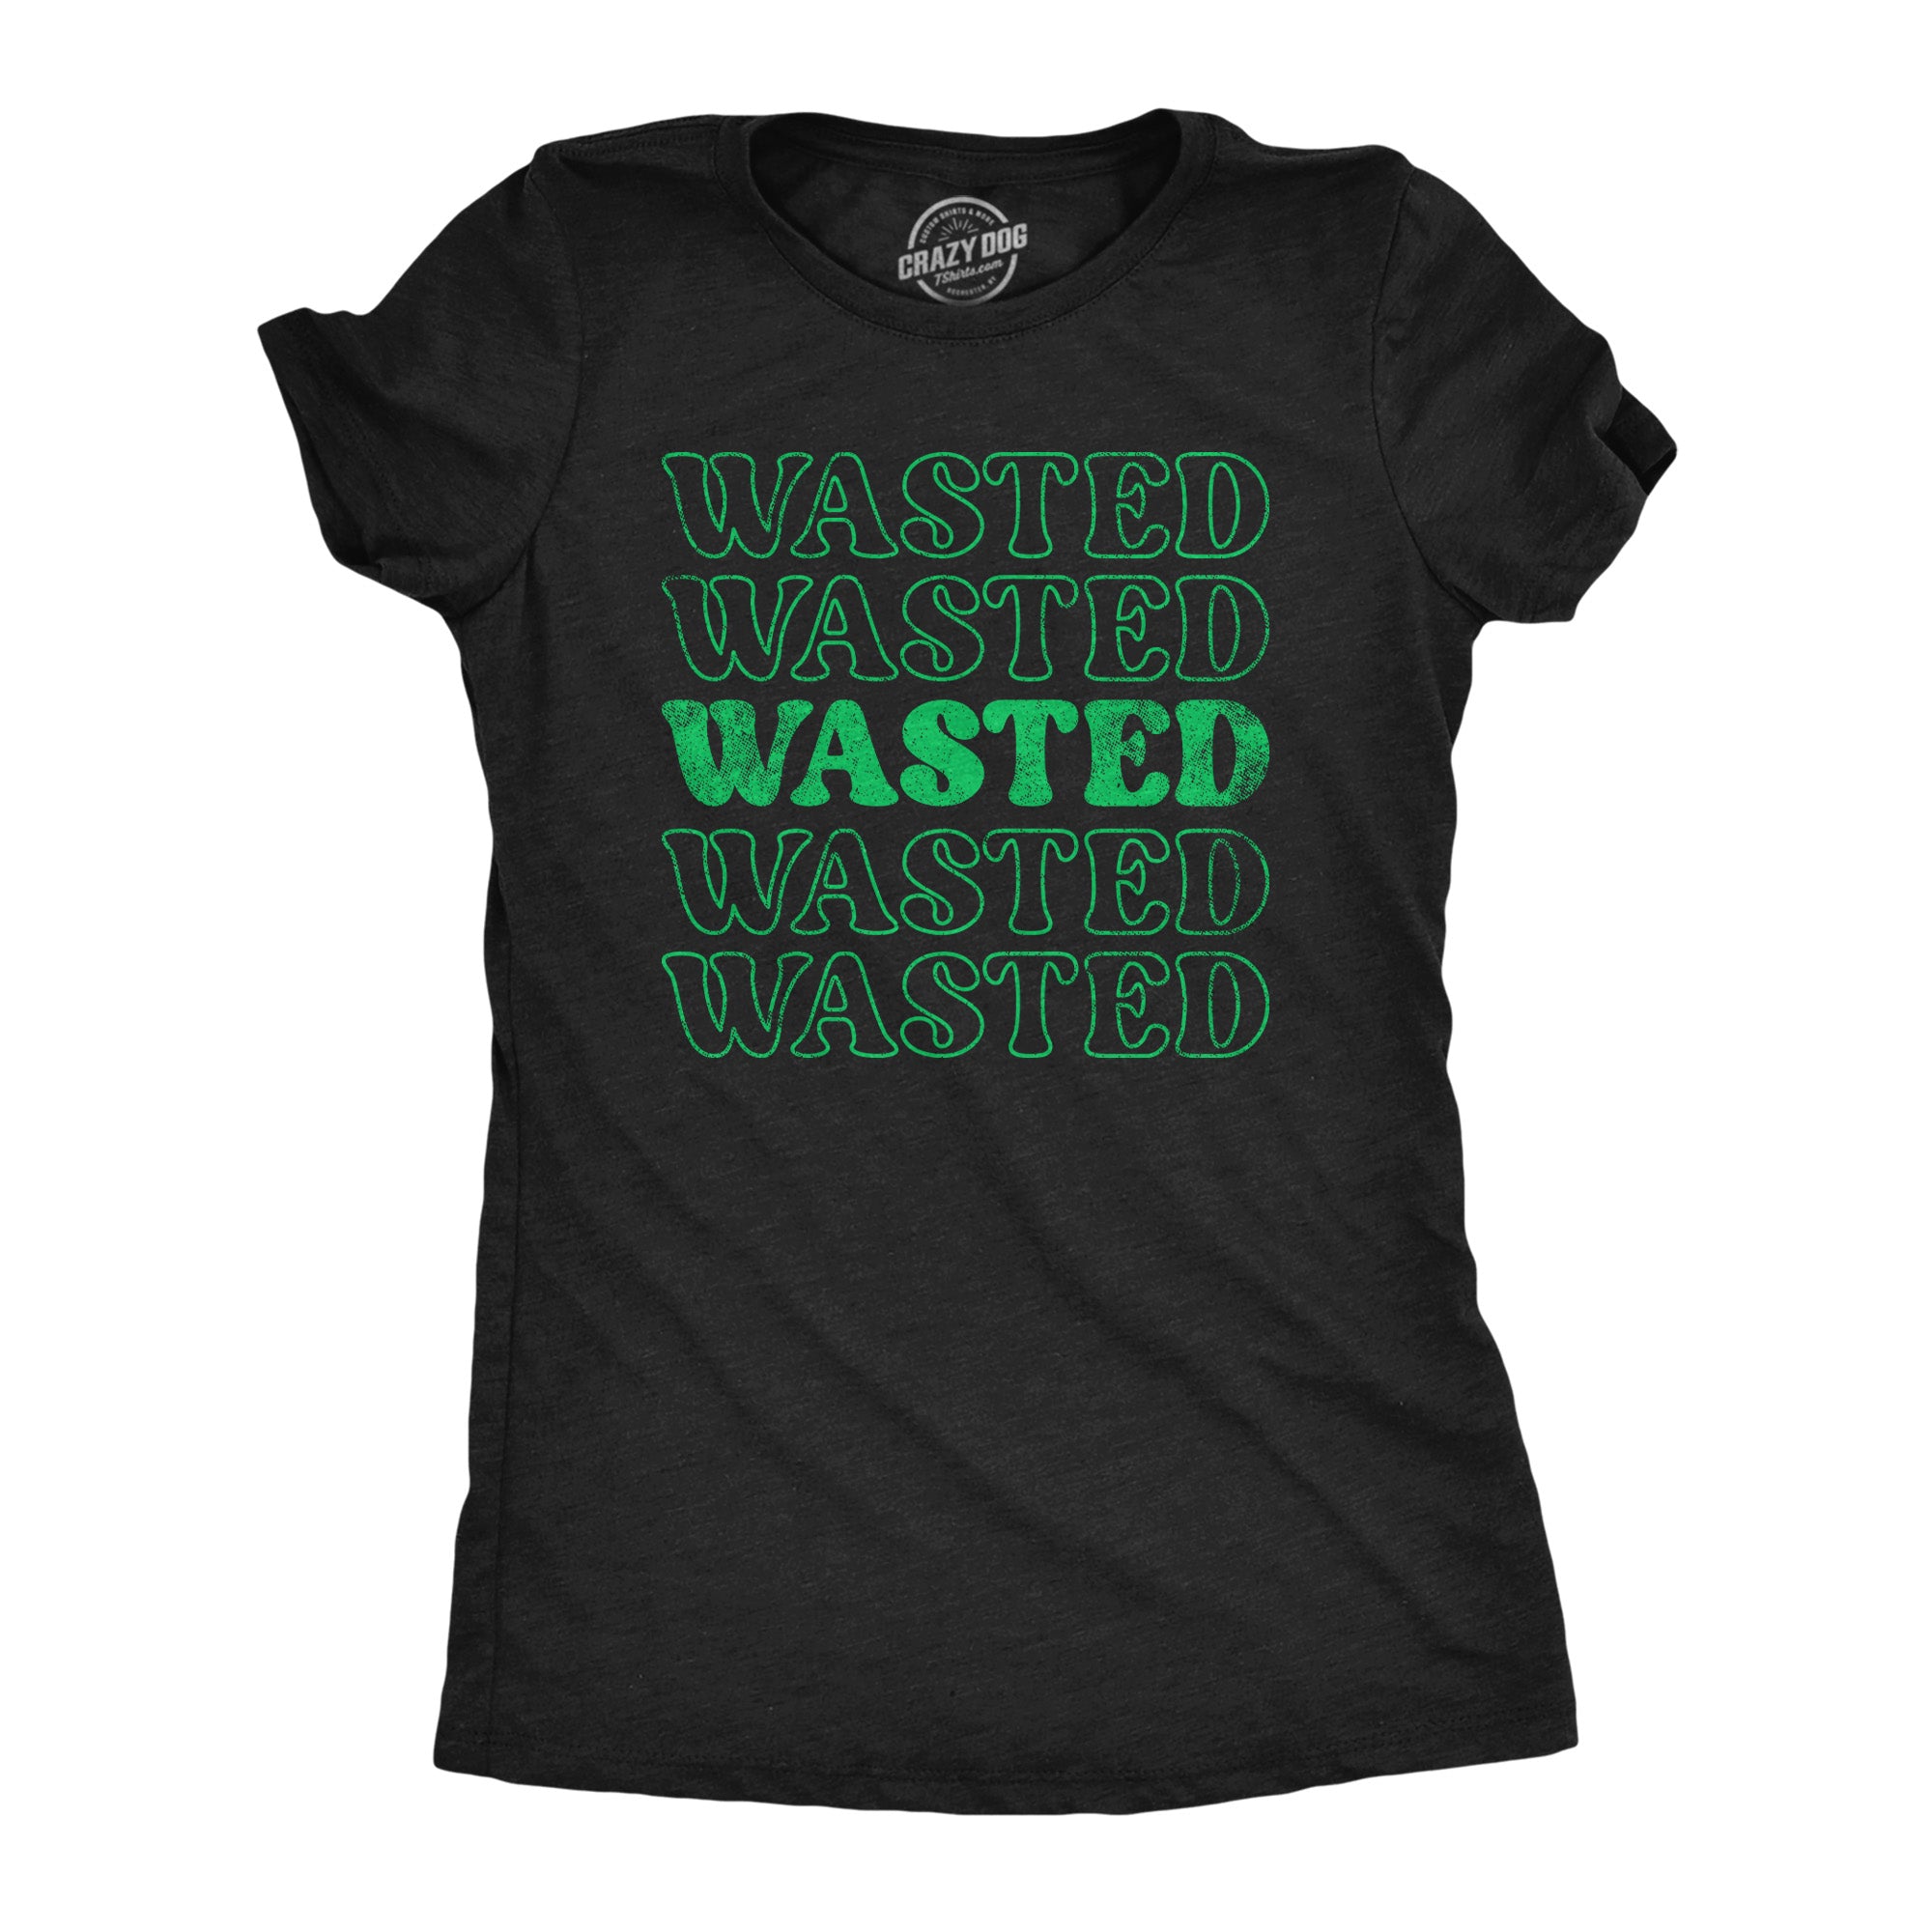 Funny Heather Black - Retro Wasted Retro Wasted Womens T Shirt Nerdy Saint Patrick's Day Drinking Tee